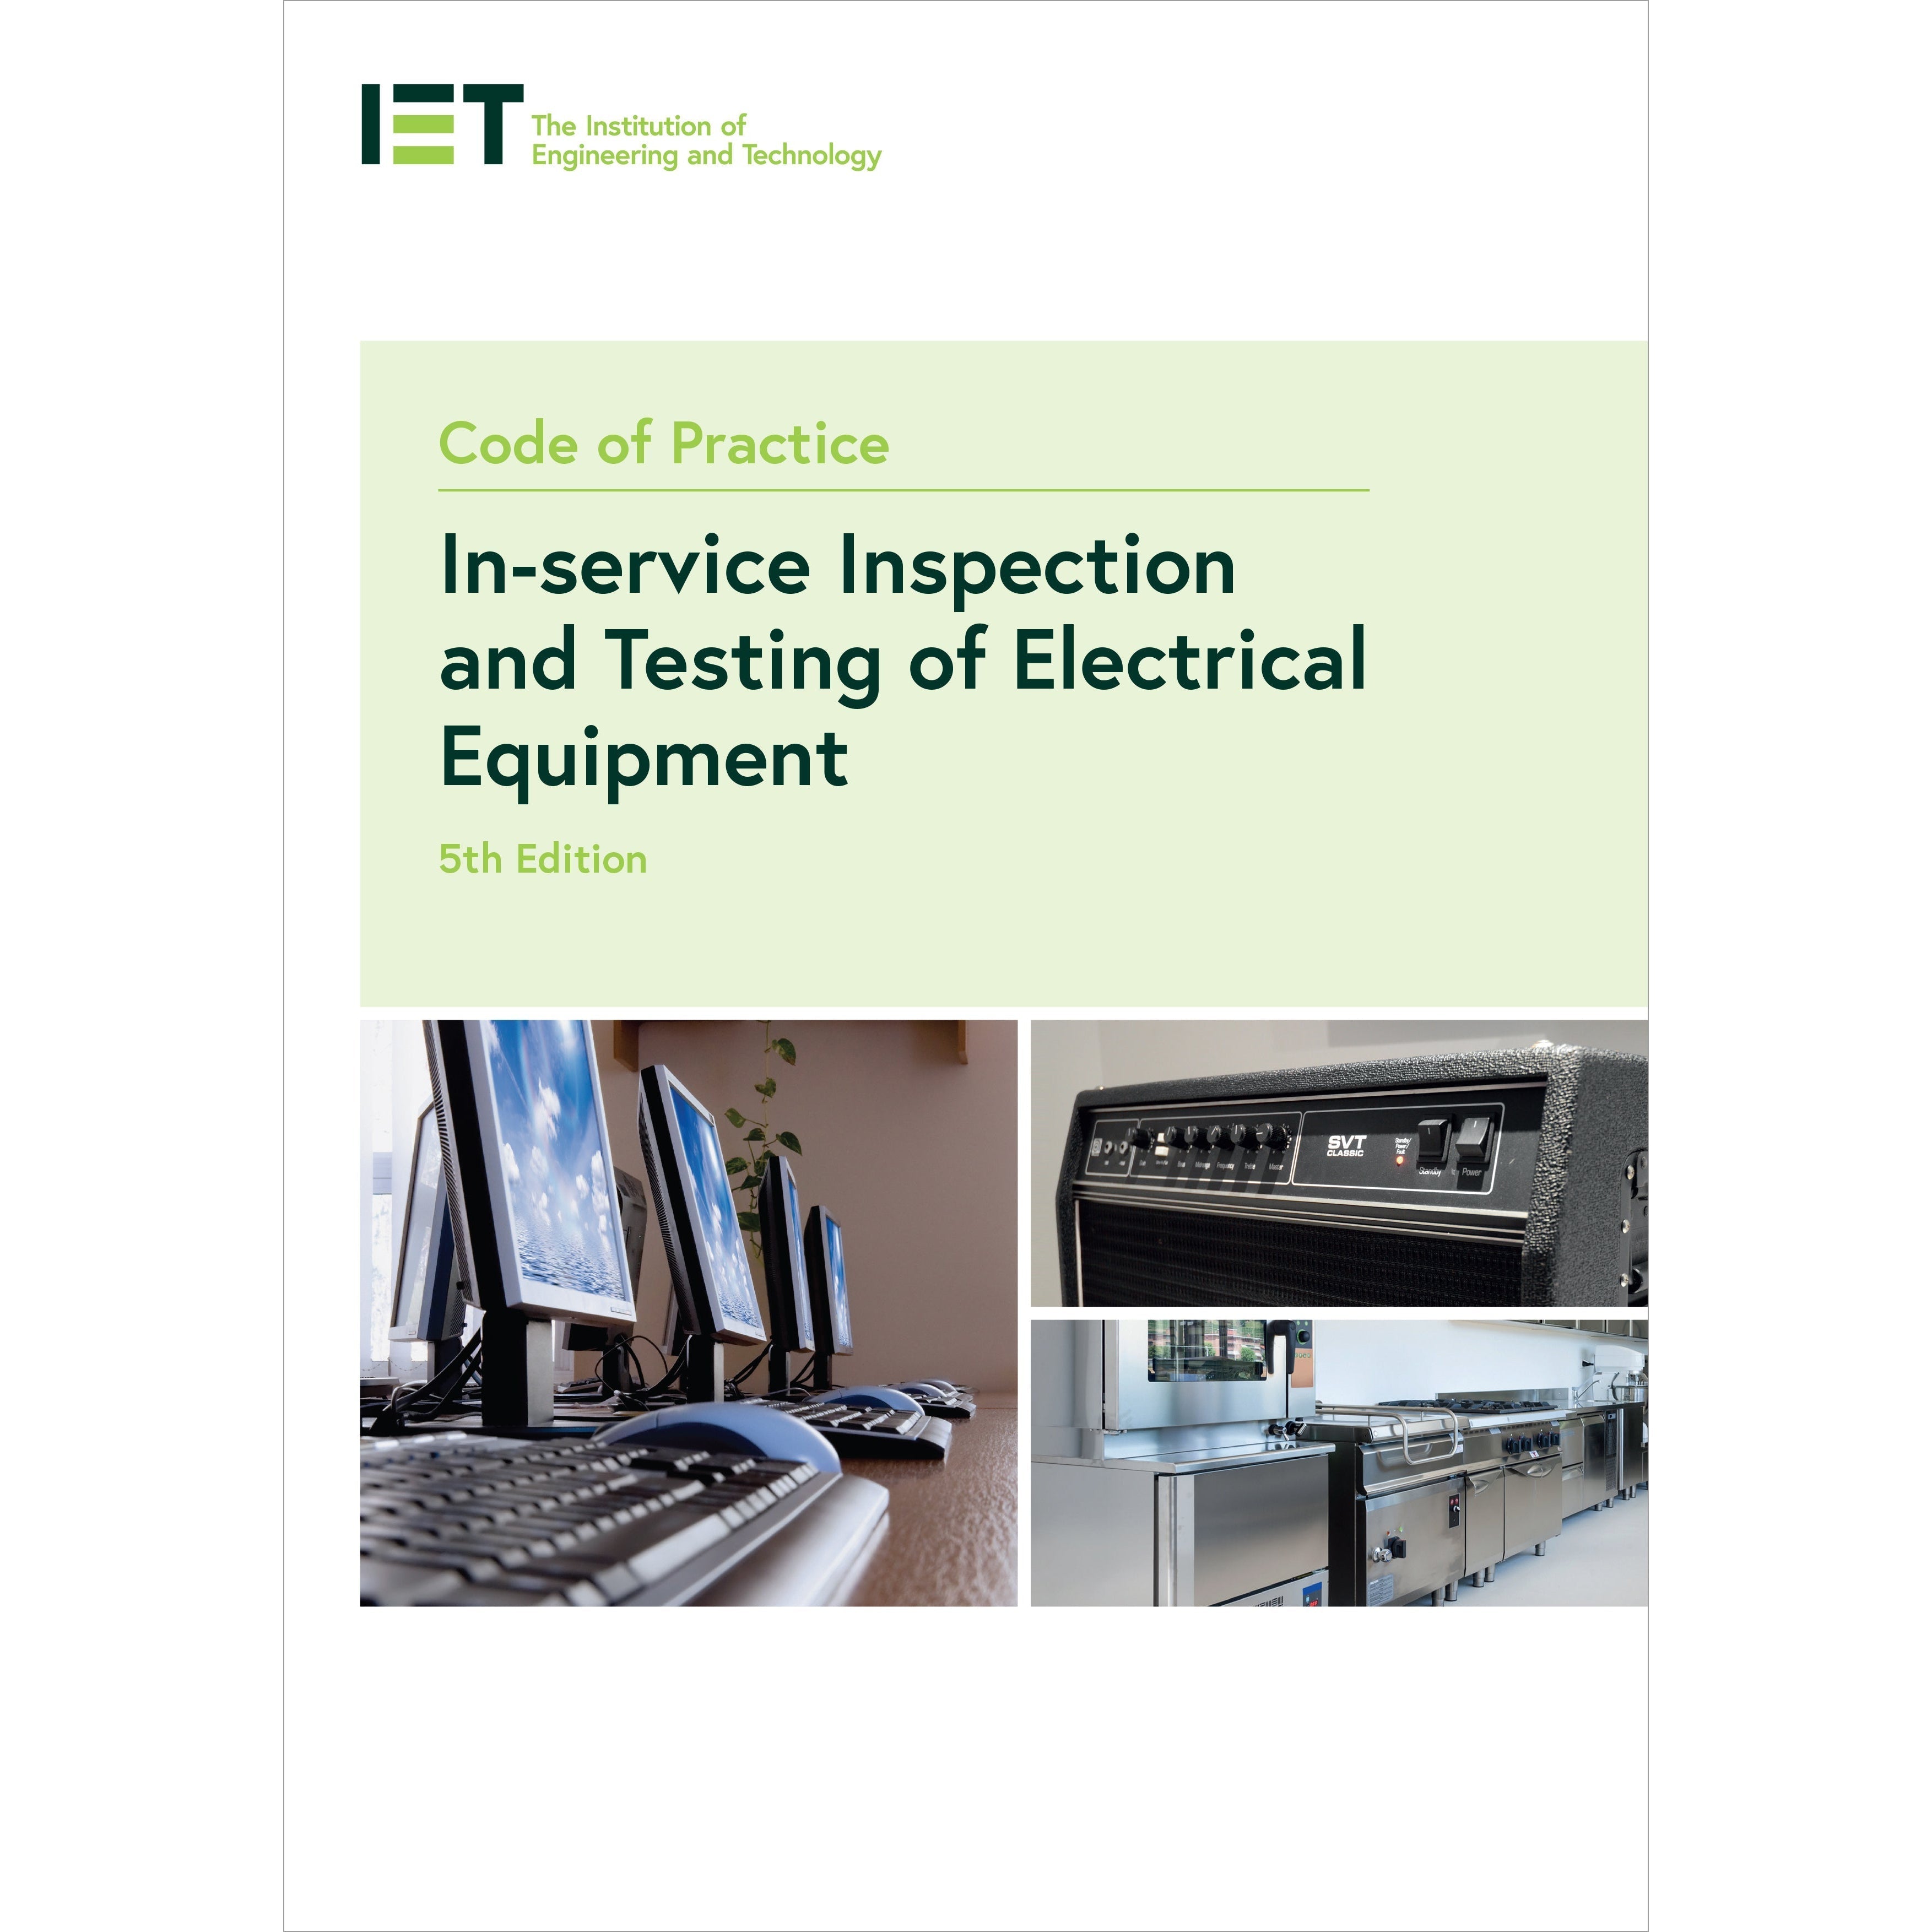 IET PIETPAT20 Code of practice for in service Inspection and Testing of Electrical Equipment - 5th Edition